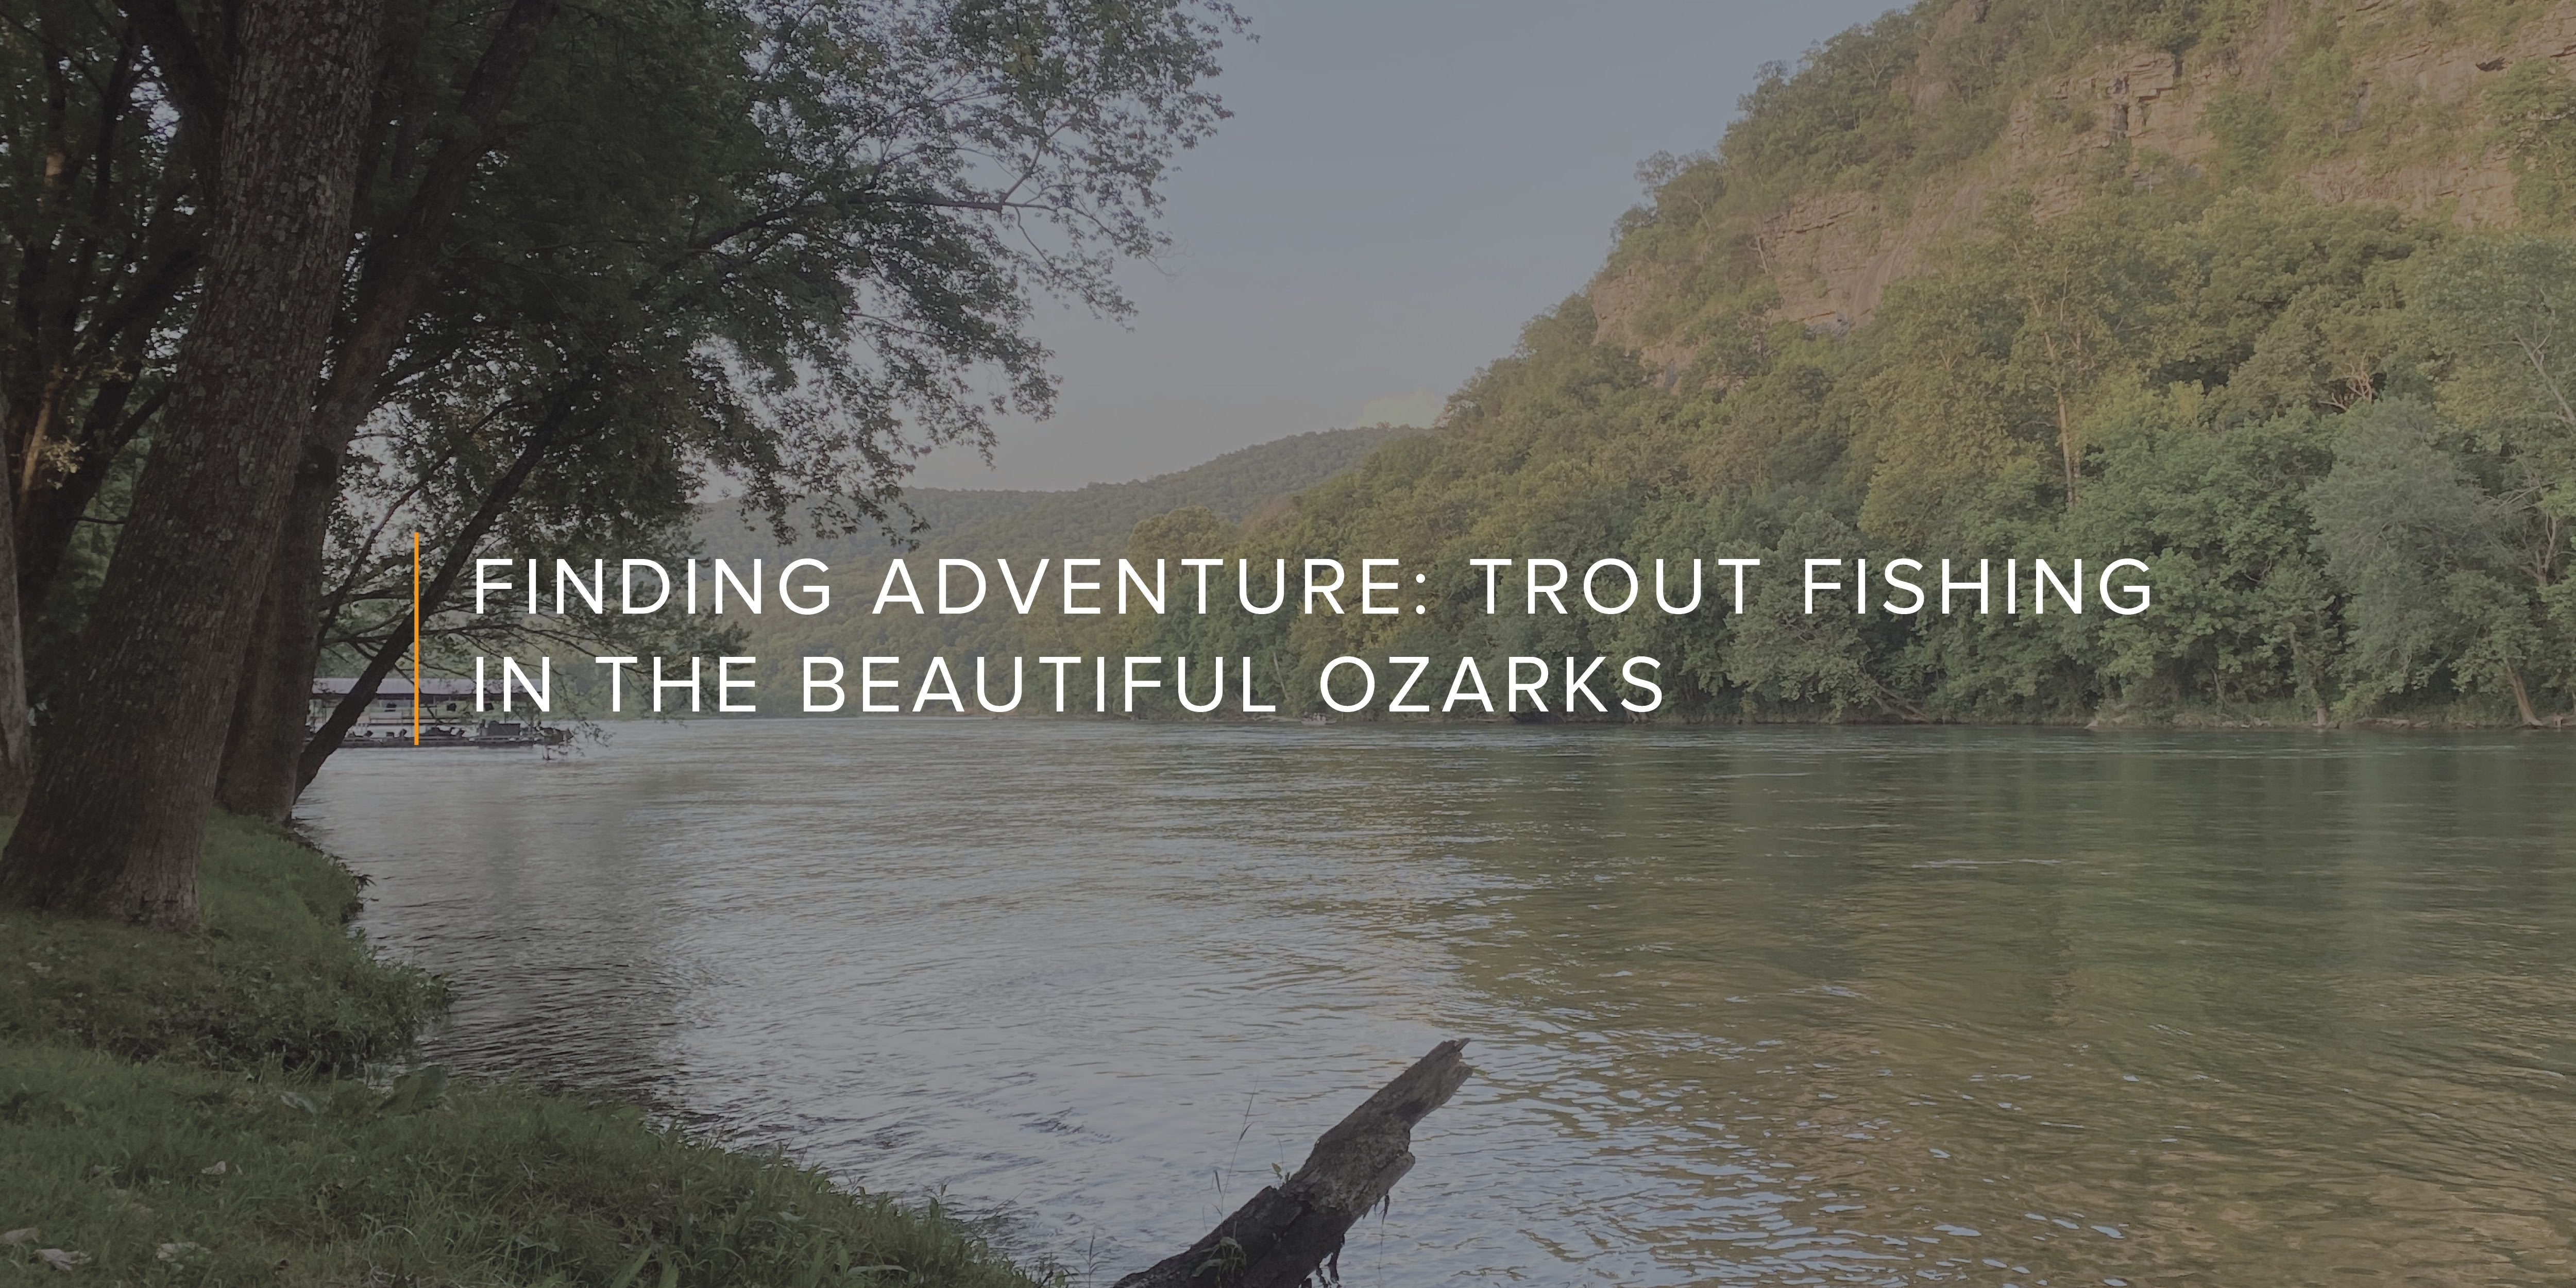 Finding Adventure: Trout Fishing in the Beautiful Ozarks